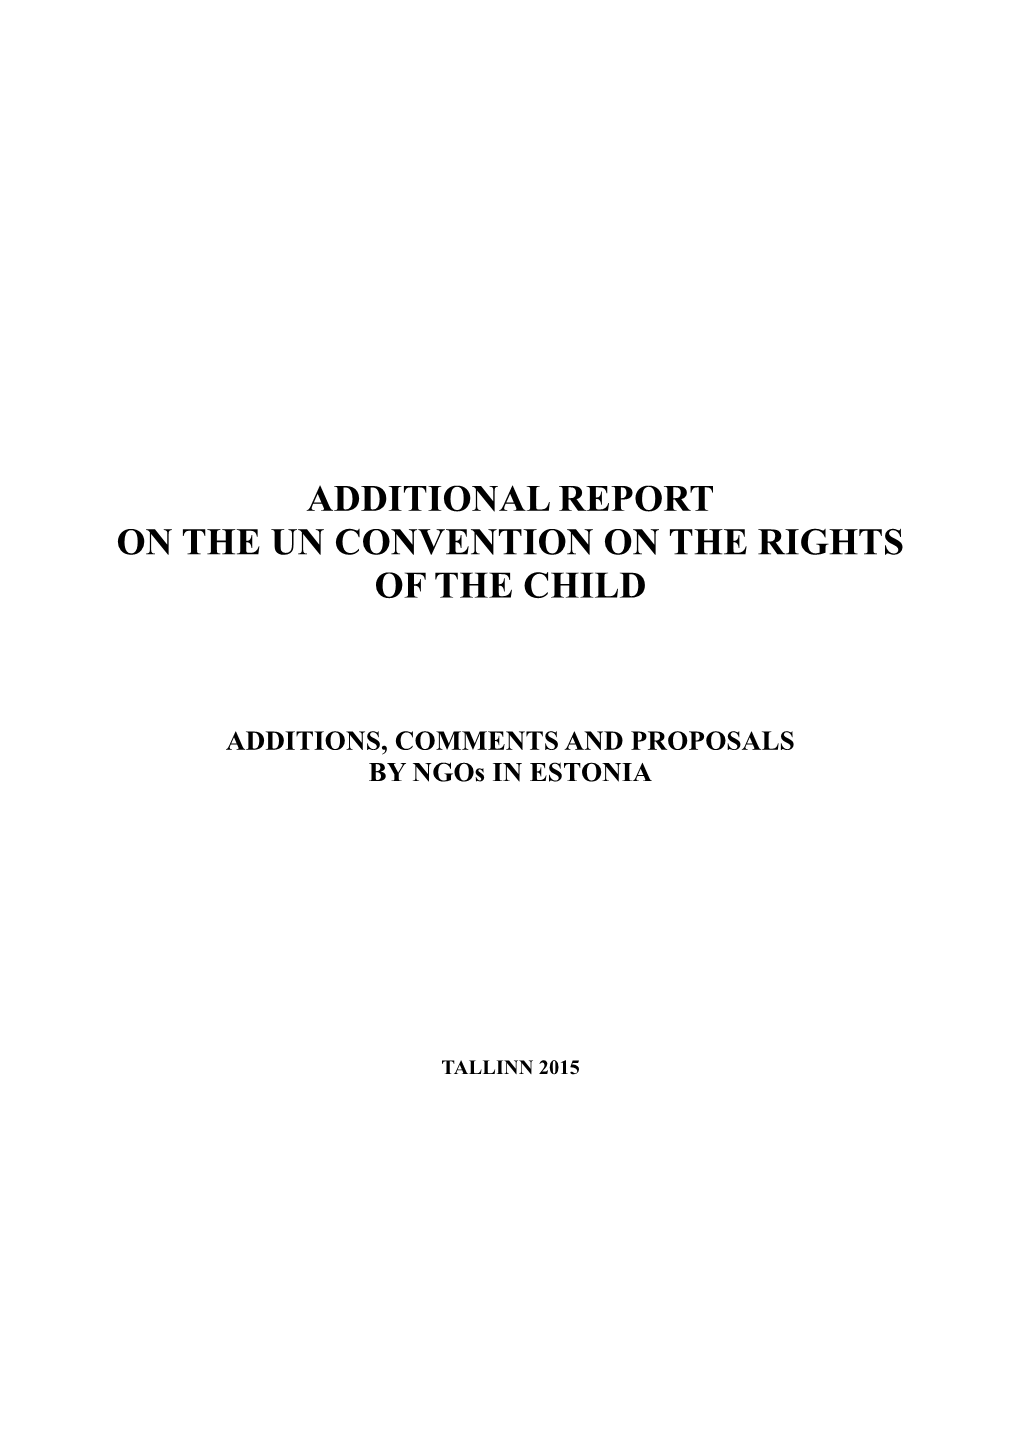 Additional Report on the Un Convention on the Rights of the Child